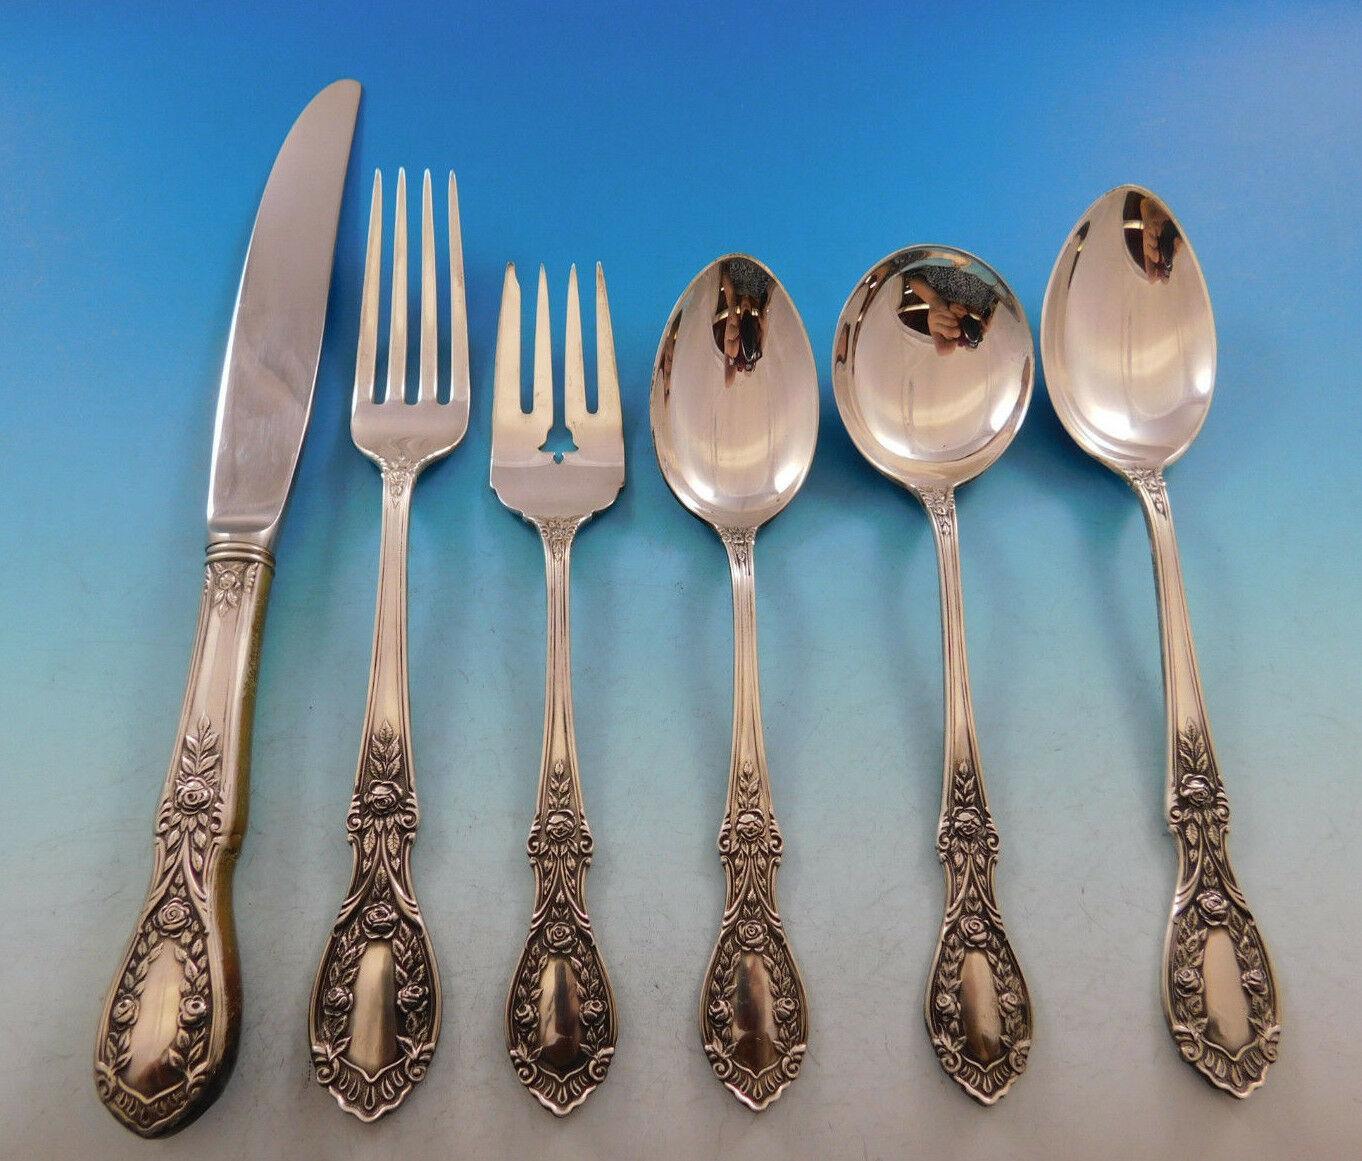 Gorgeous American Beauty by Manchester sterling silver flatware set - 56 pieces. This set includes:

8 knives, 8 5/8